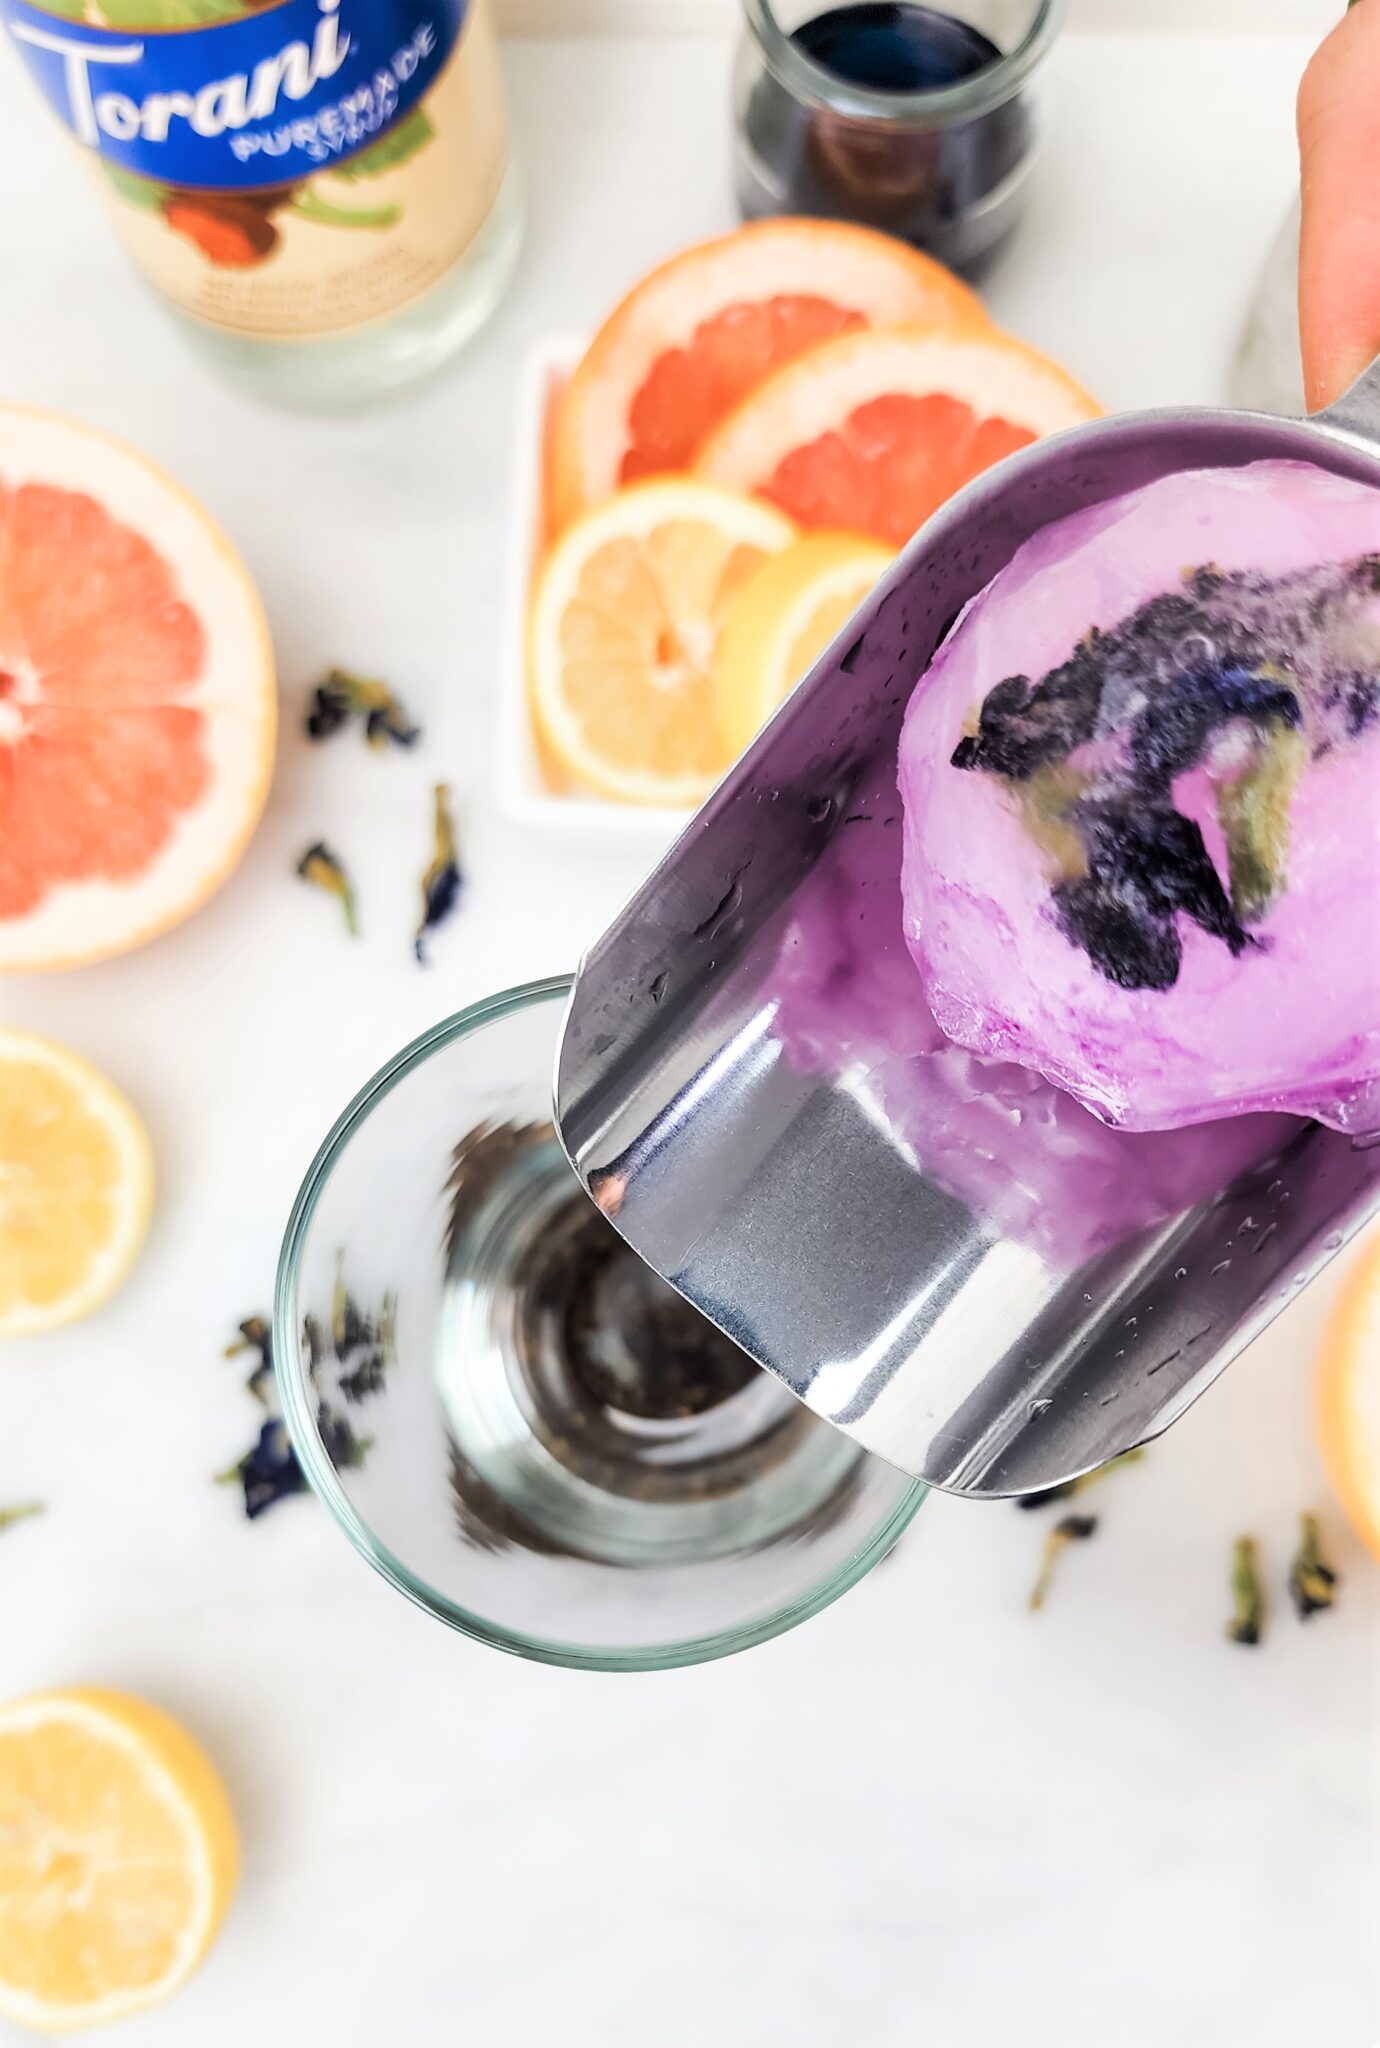 A lemon and butterfly pea tea infused ice ball is being placed into a glass.